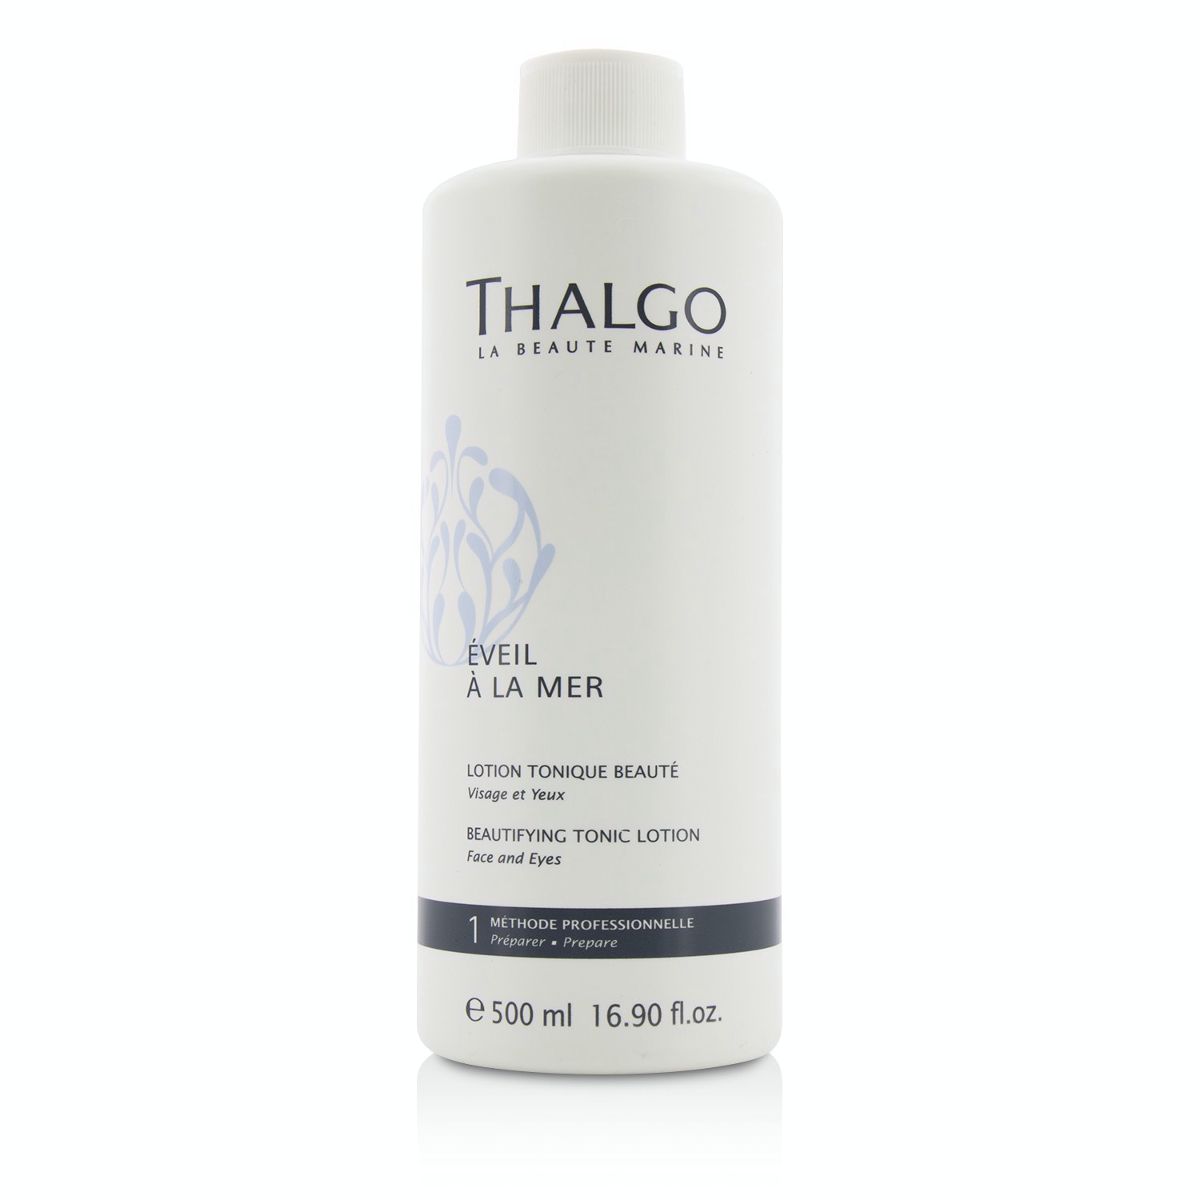 Eveil A La Mer Beautifying Tonic Lotion (Face  Eyes) - For All Skin Types Even Sensitive Skin (Salon Size) Thalgo Image